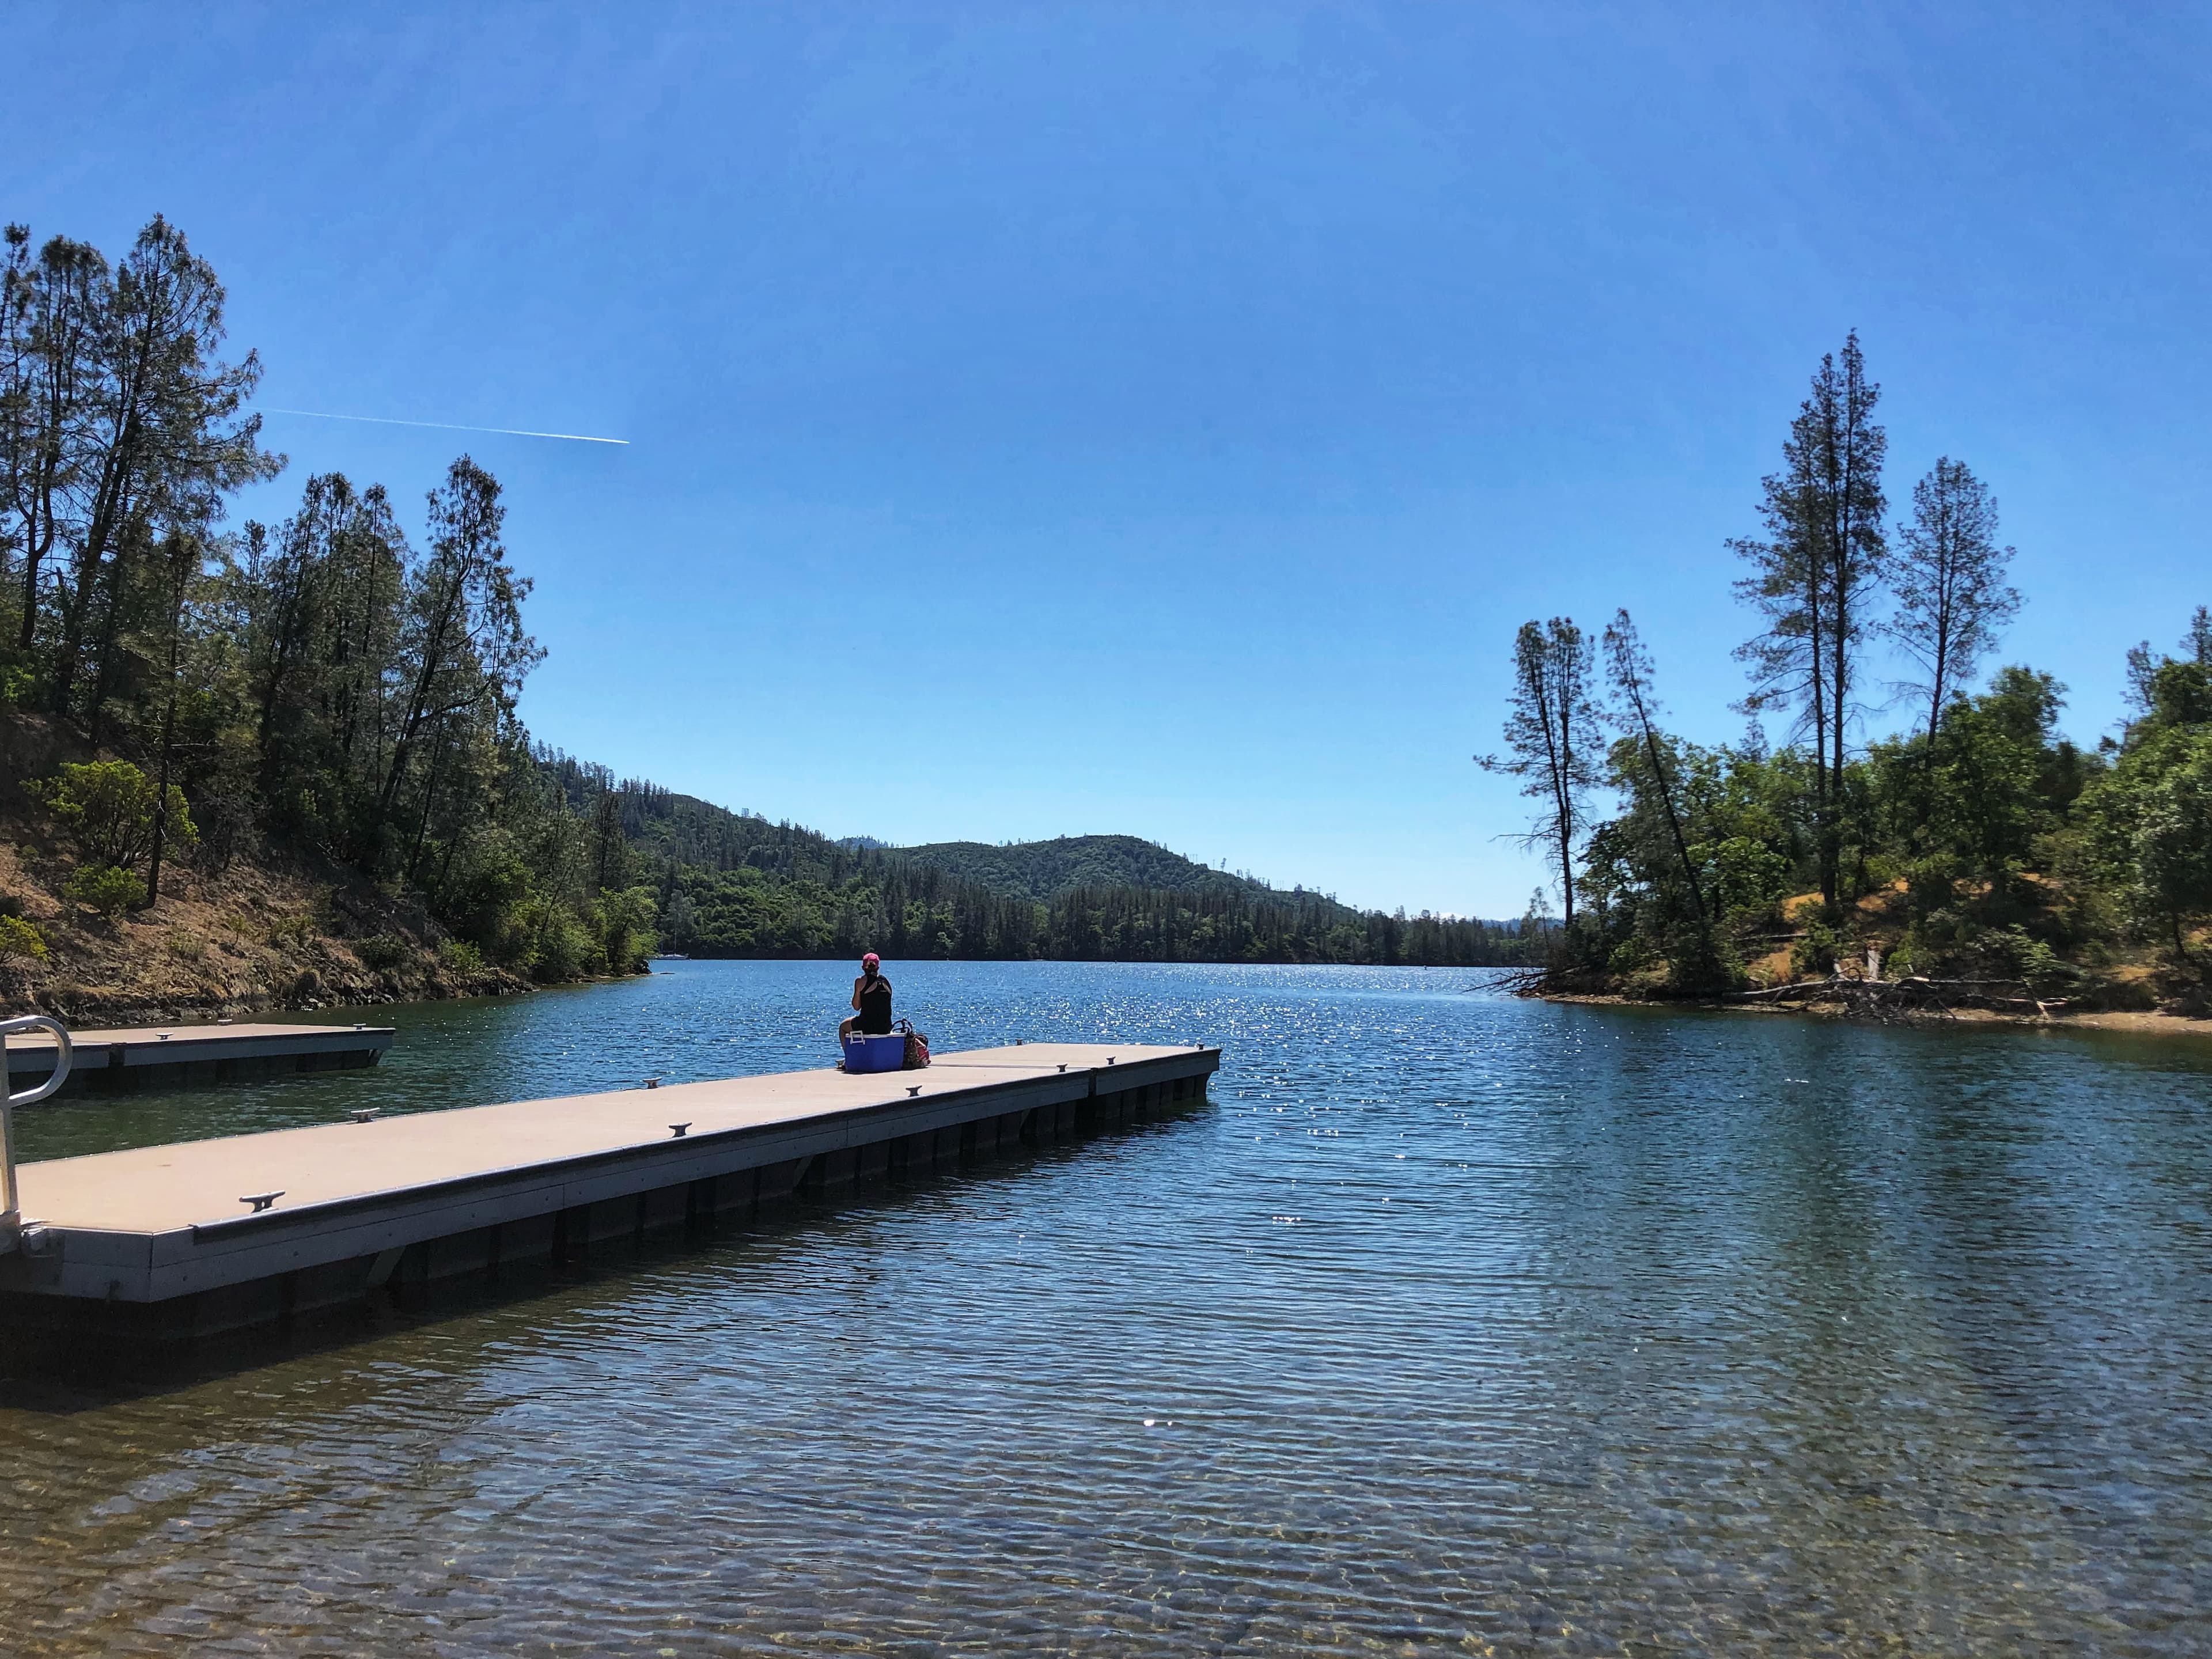 Blue sky dock on lake with person sitting